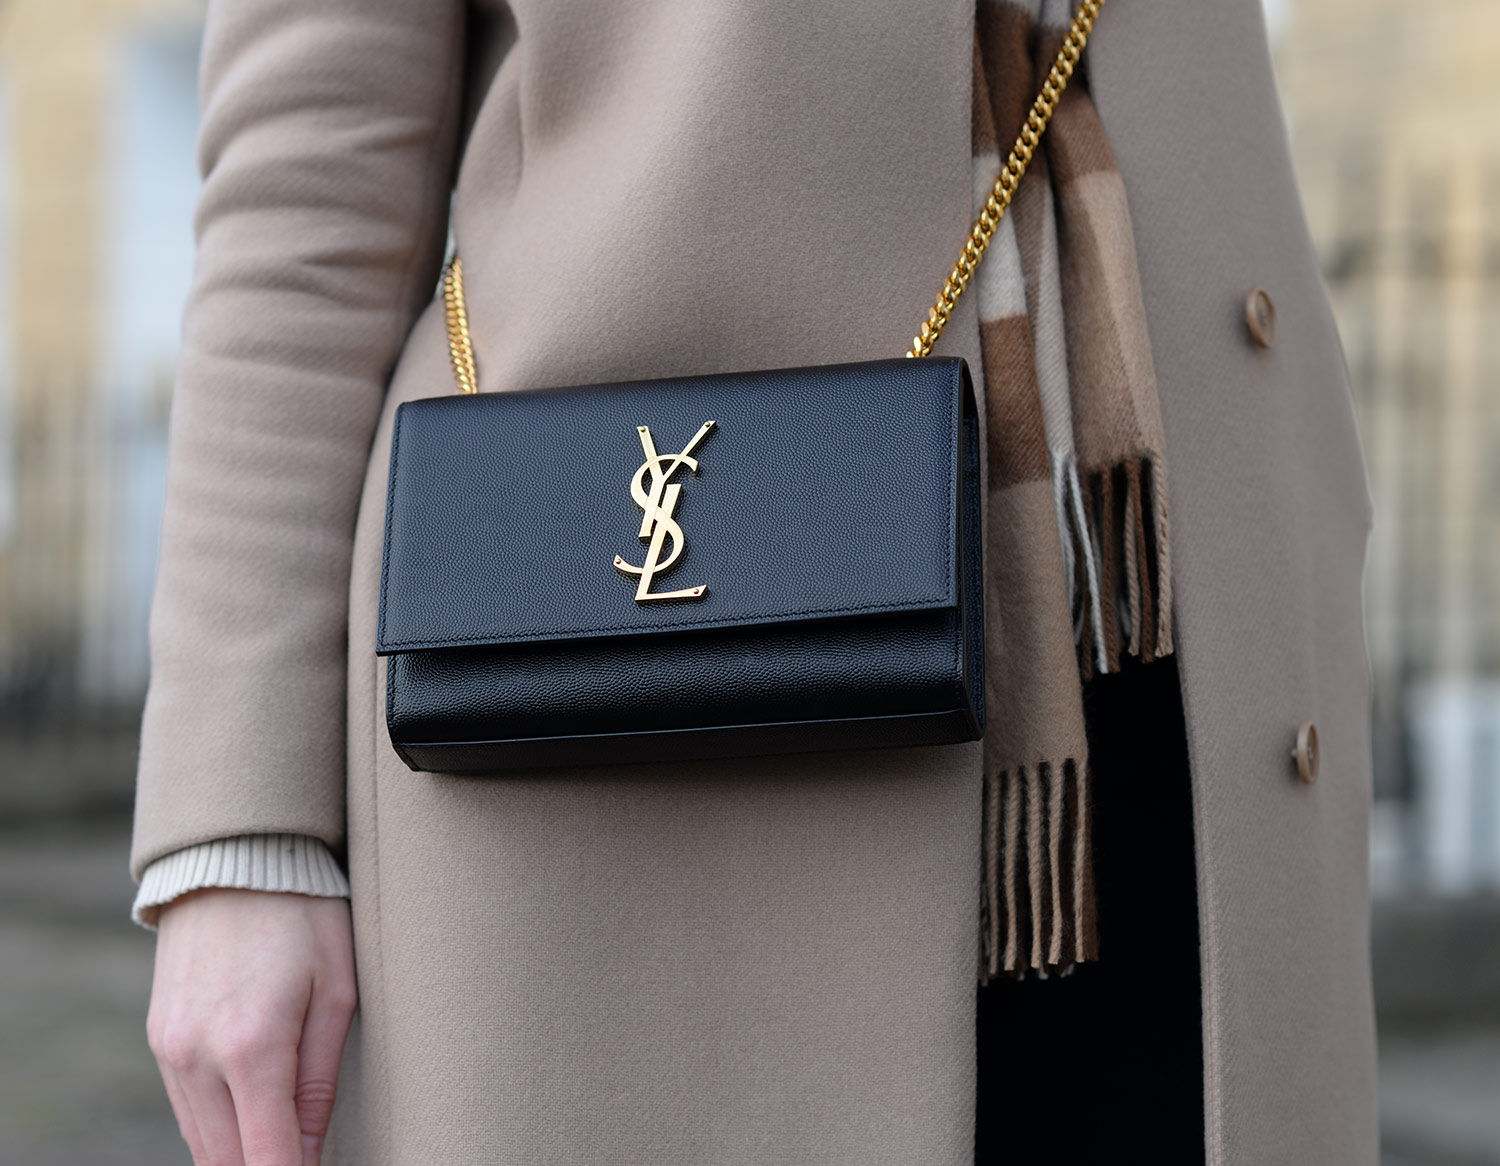 Saint Laurent's Shopping Leather Tote Bag Is a Forever Buy